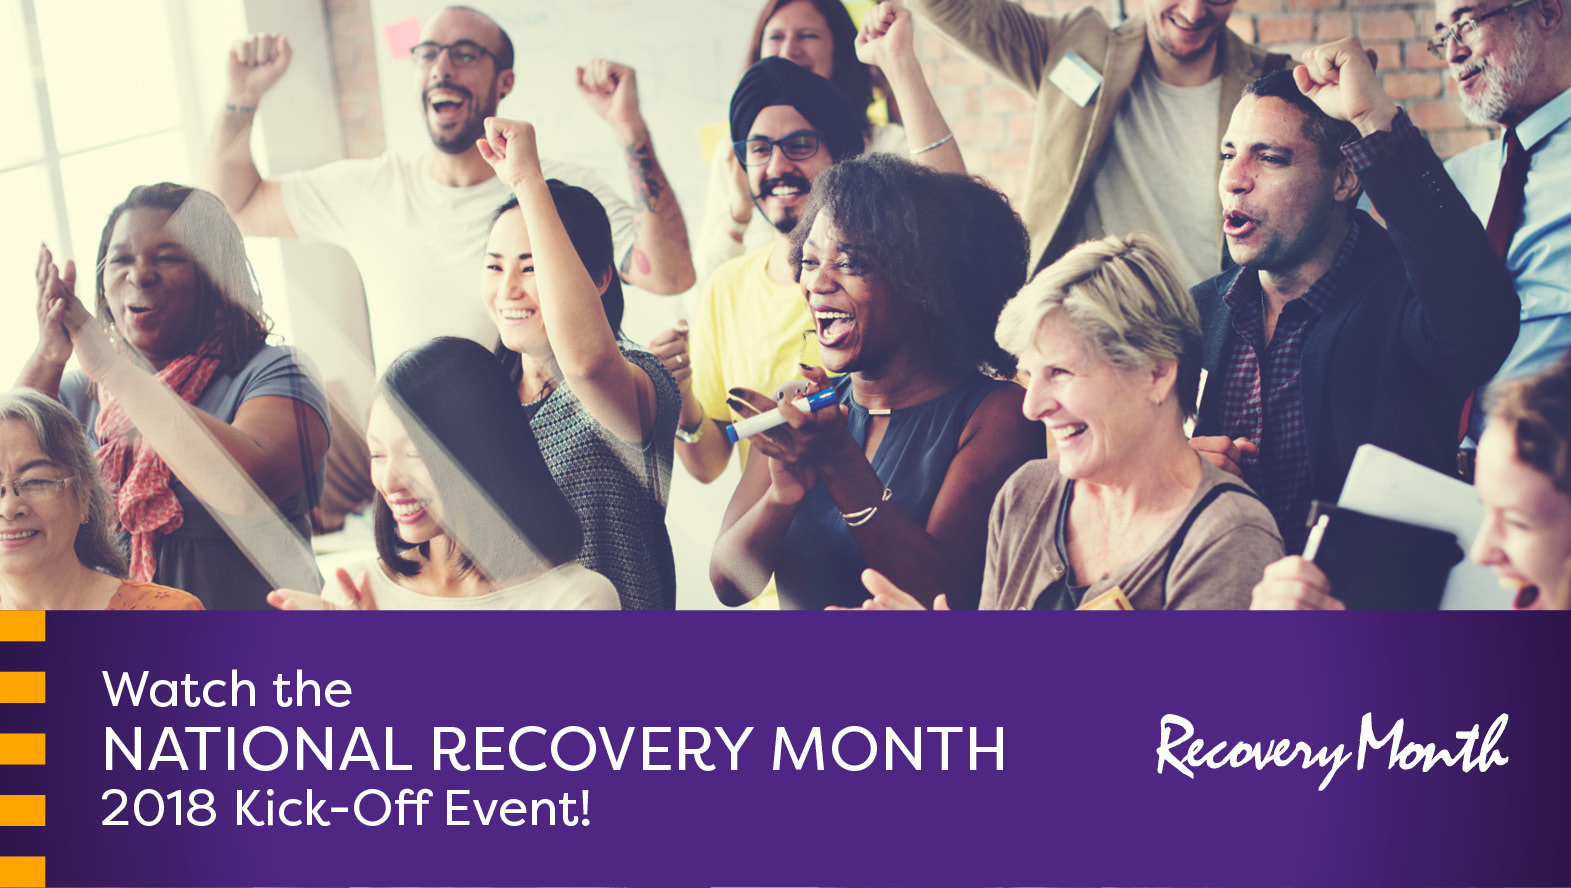 National Recovery Month 2018 Live Kick-Off